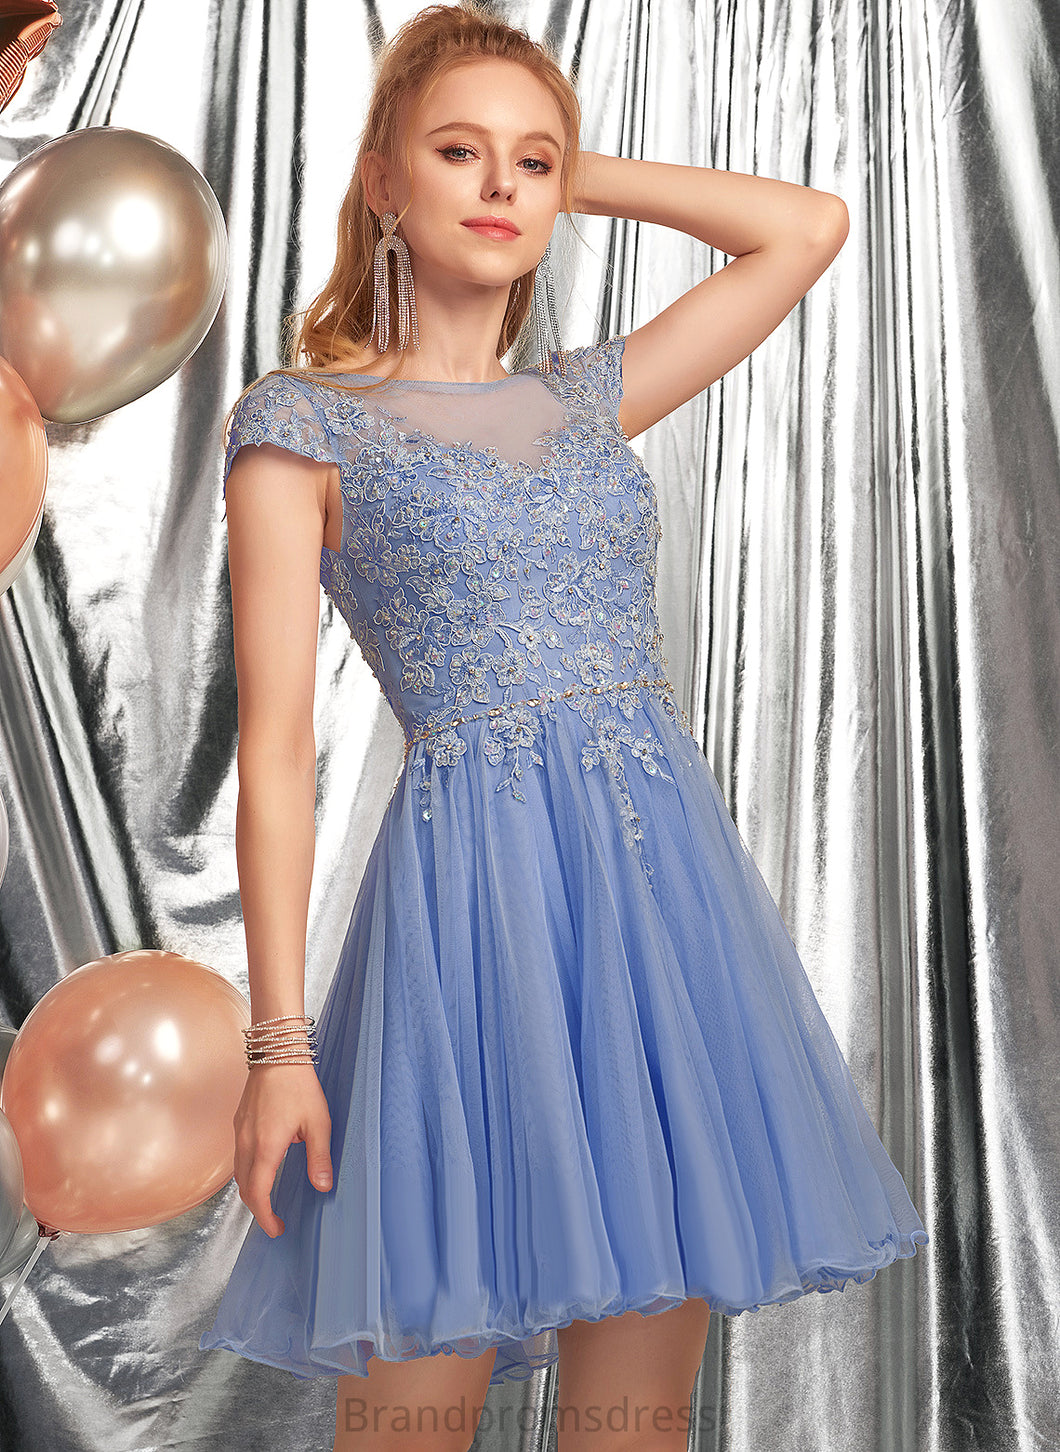 Scoop Lace Lace Homecoming Beading Leilani Dress Homecoming Dresses A-Line Short/Mini Neck Appliques With Tulle